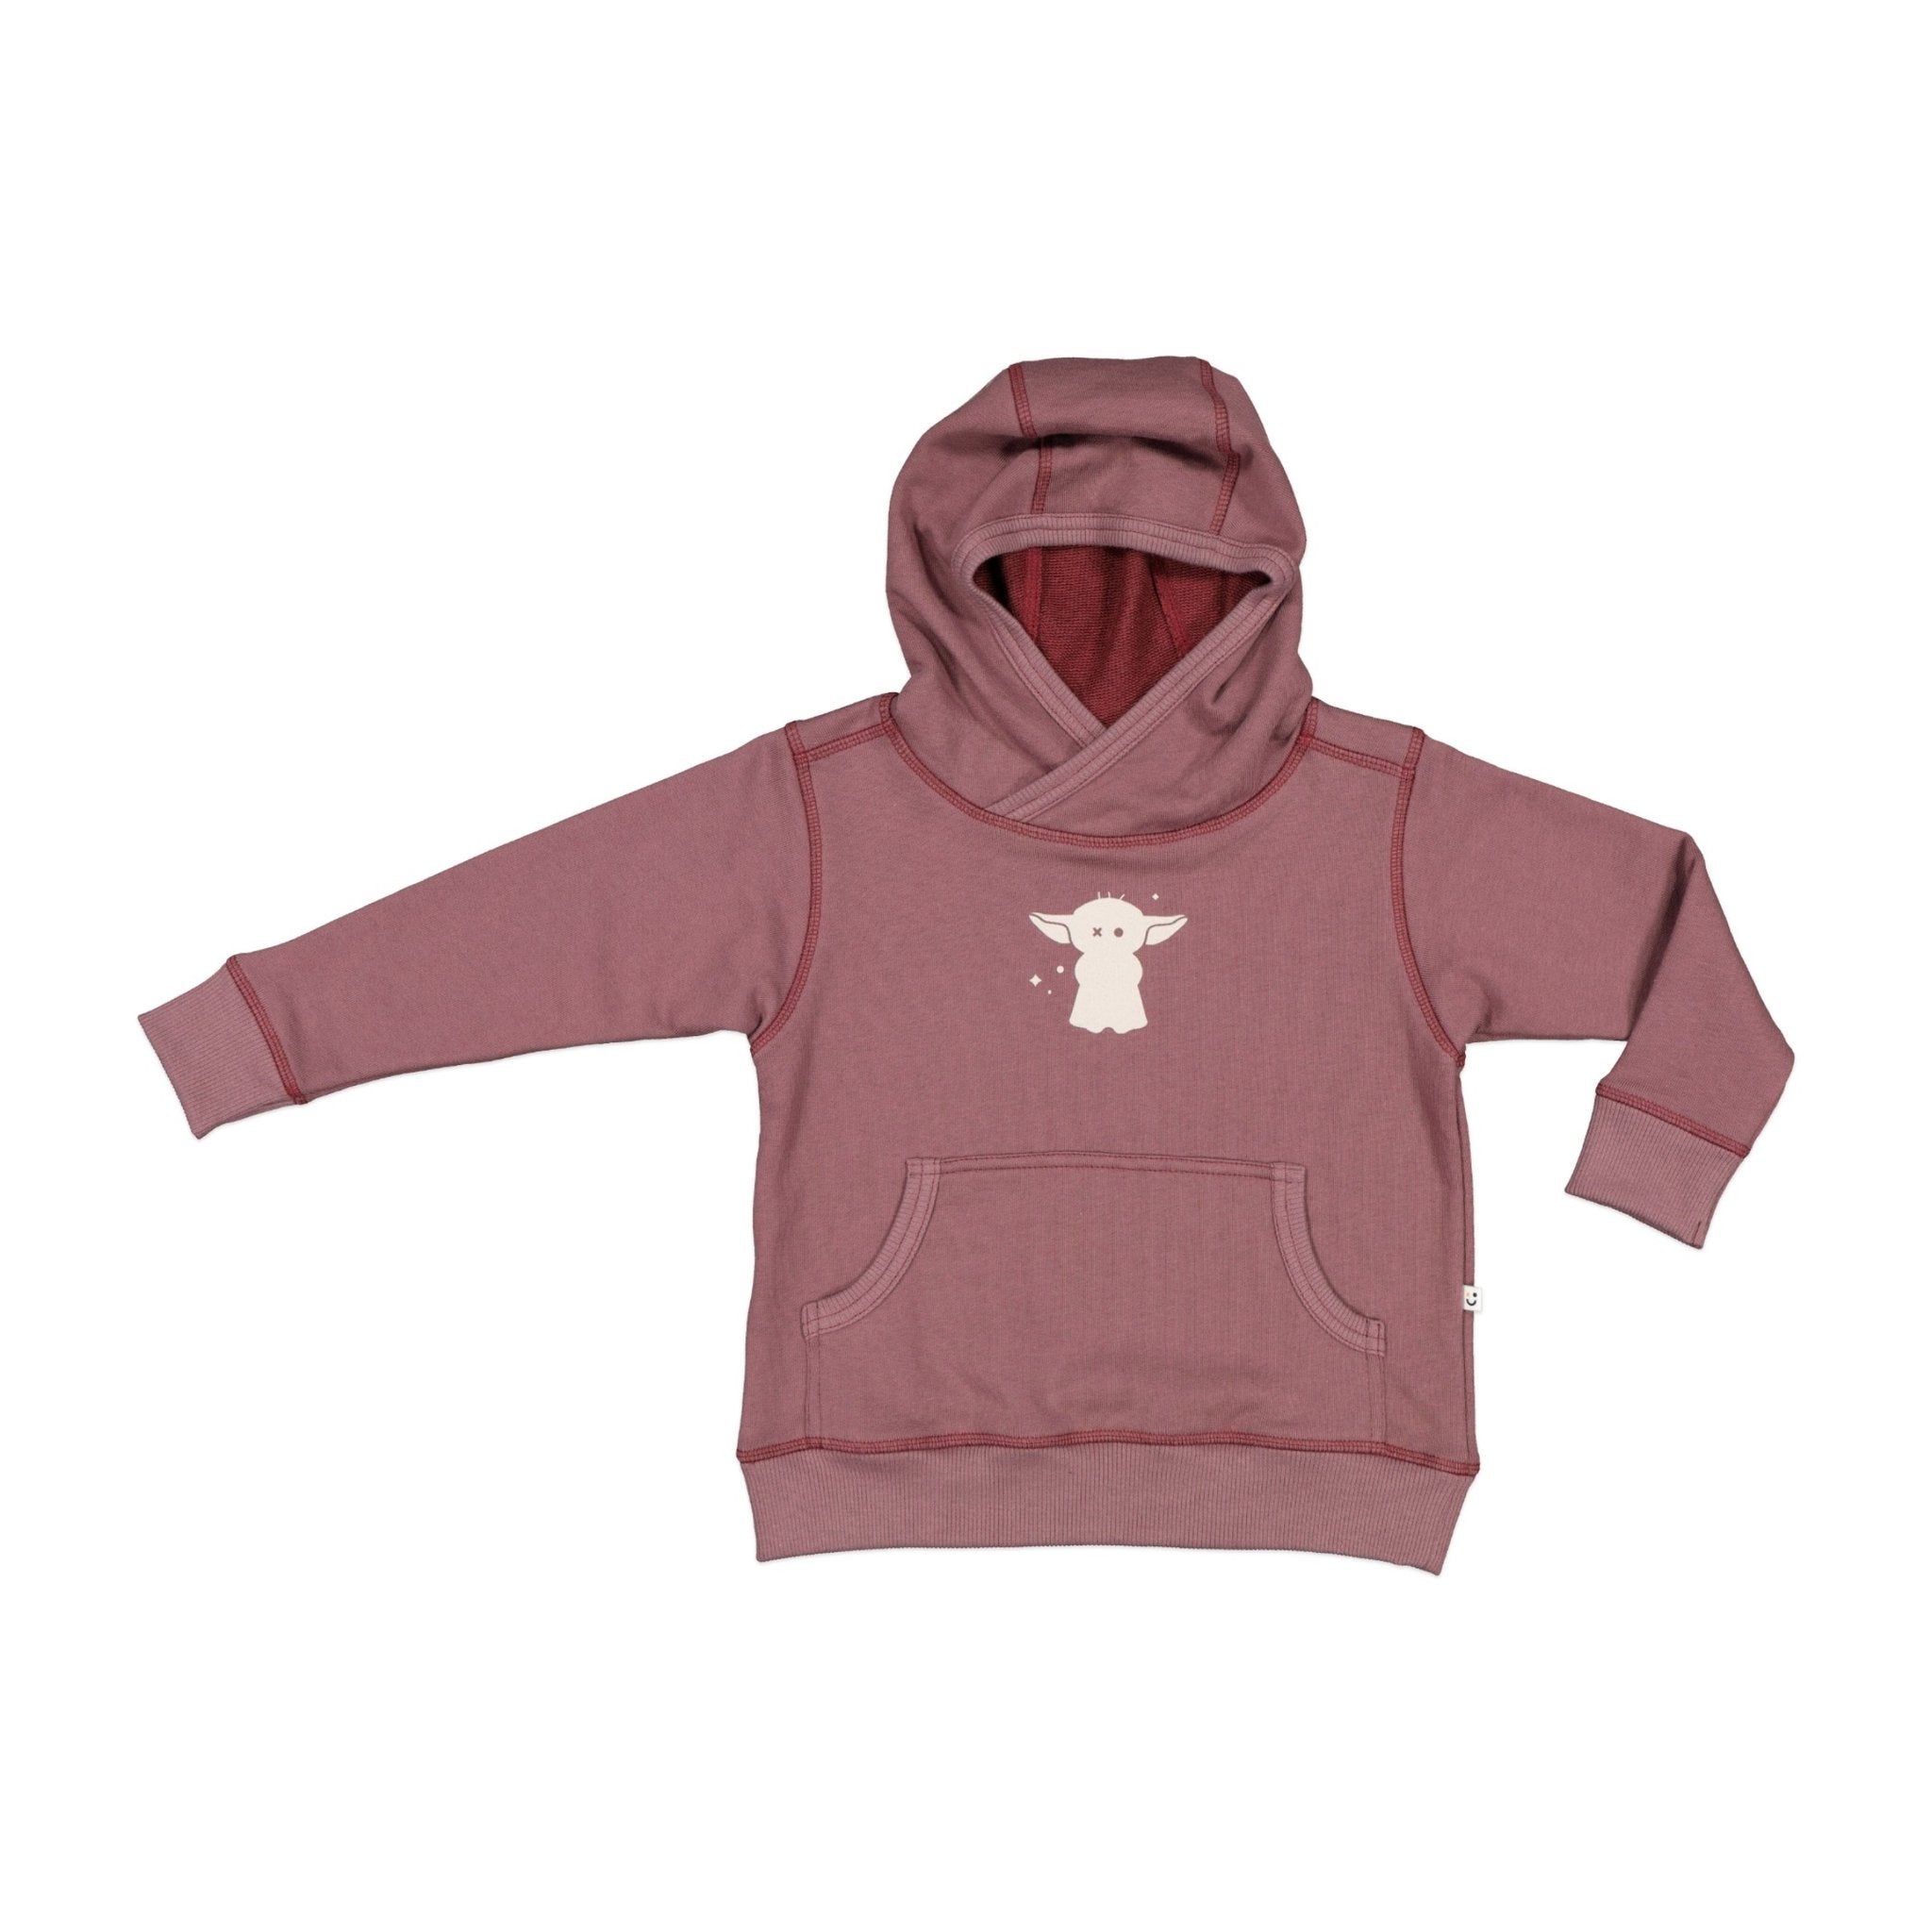 Slouch hoody - Plum / Humble Master